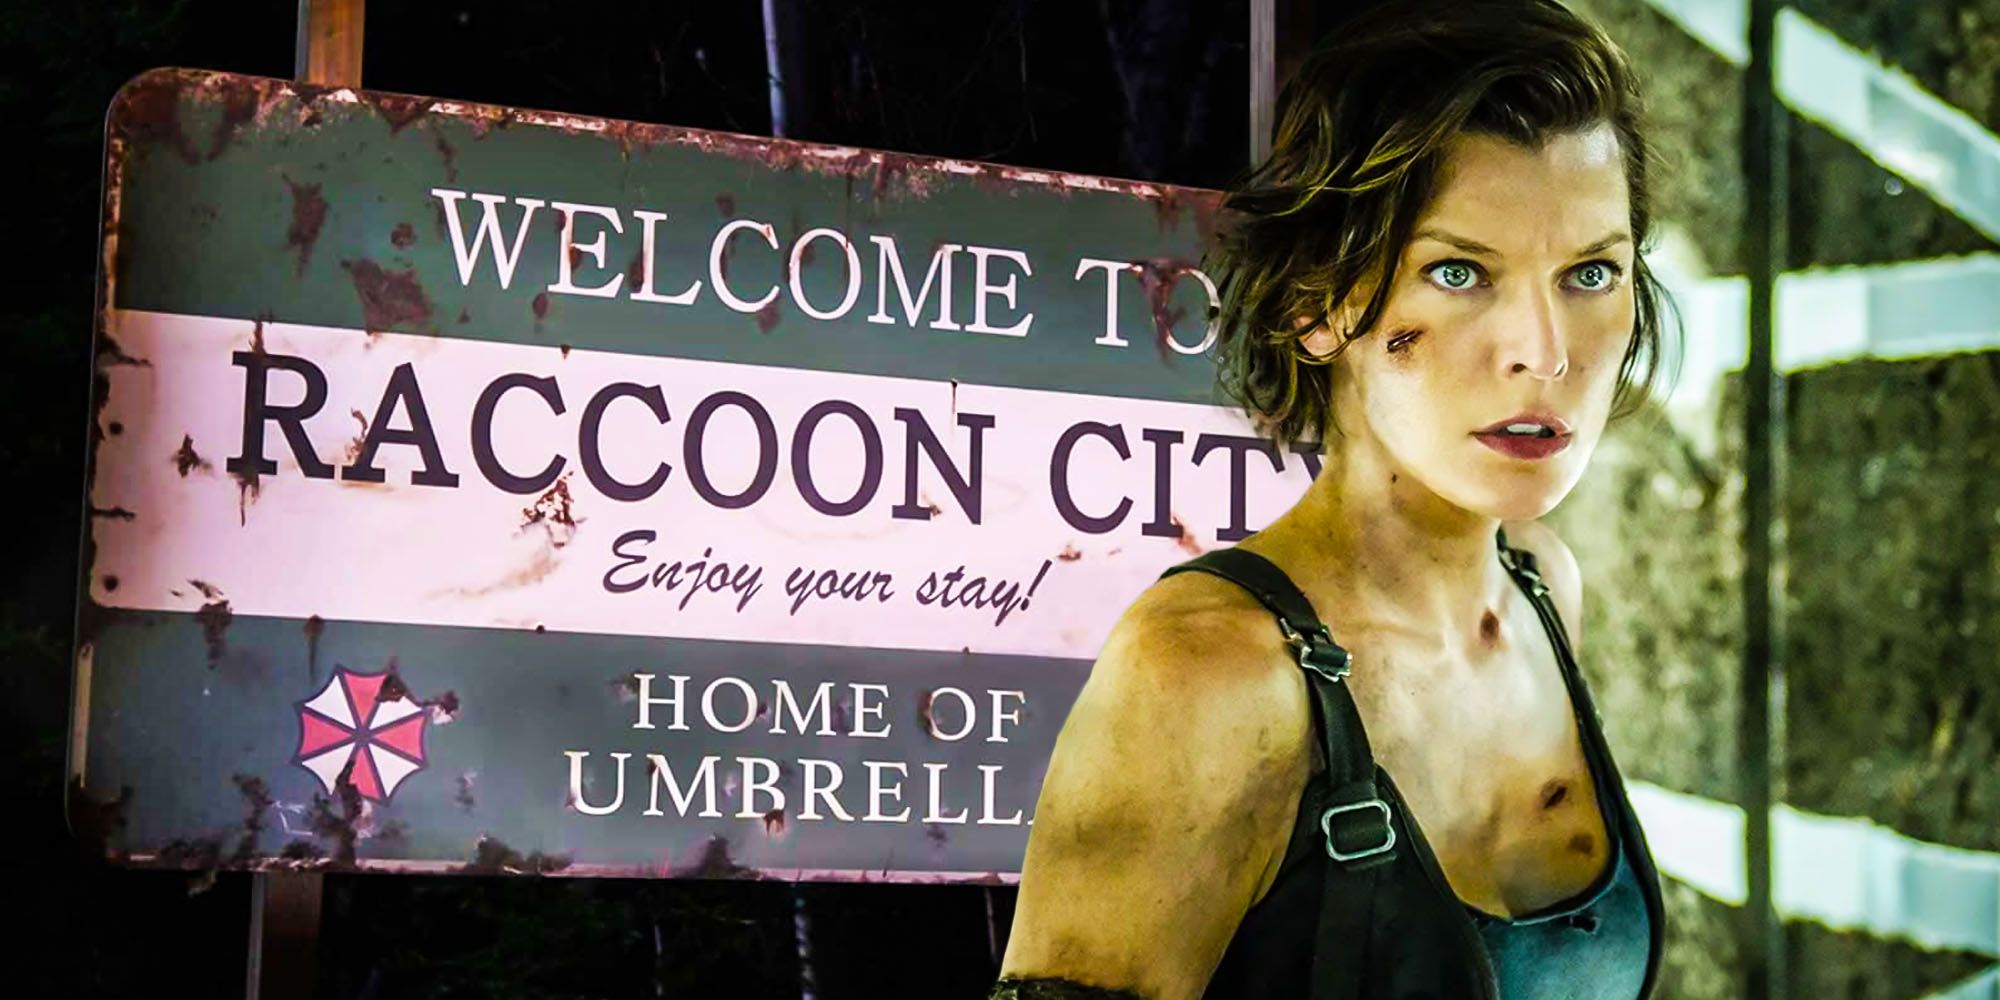 Resident evil welcome to raccoon city knows raccoon city better than originals